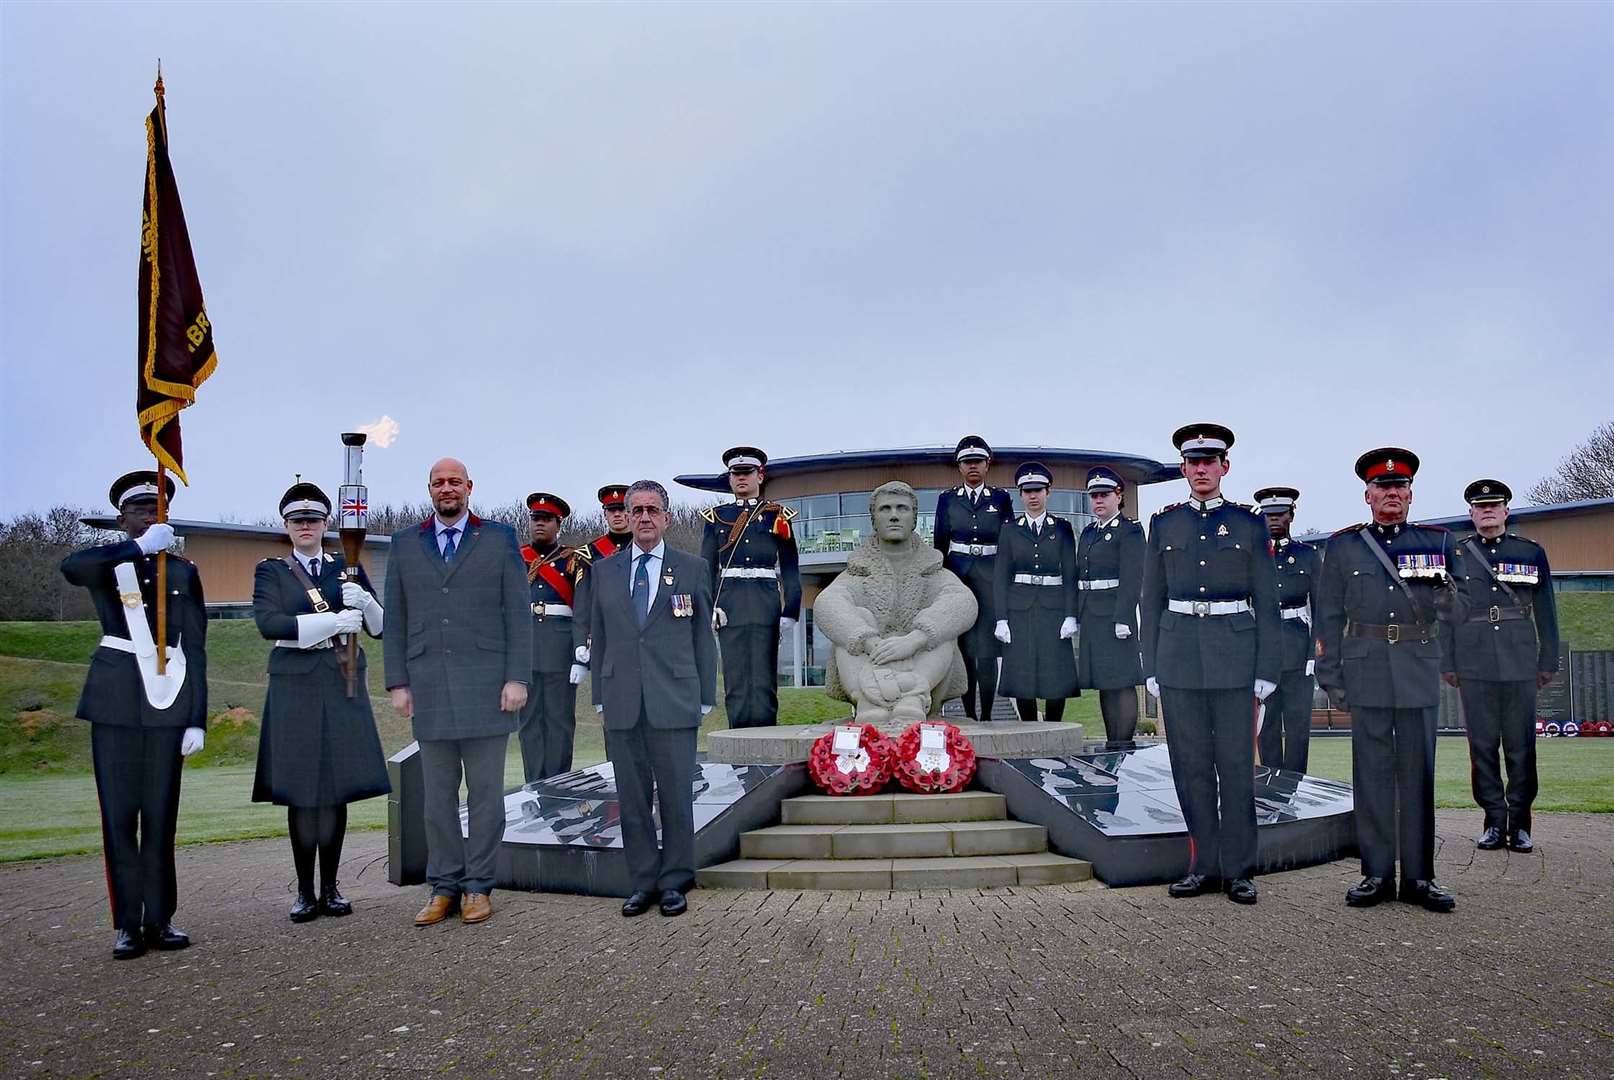 This special event took place in the UK for the first time. Picture: Battle of Britain Memorial Trust